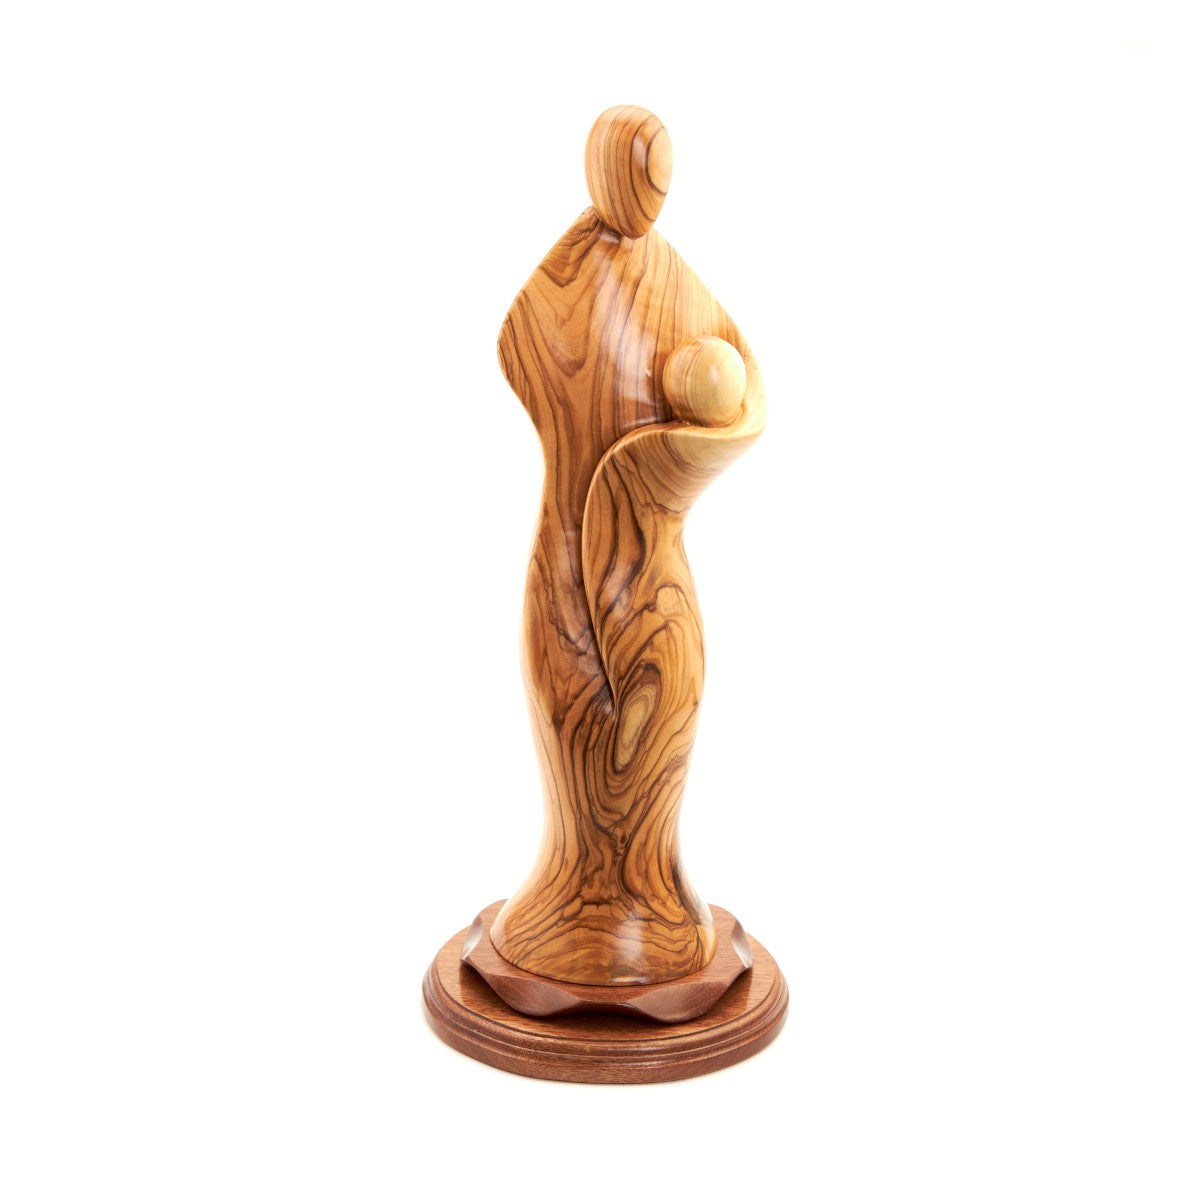 Virgin Mary with Baby Jesus Statue Abstract, 17.3" Olive Wood Carving Statue from Bethlehem